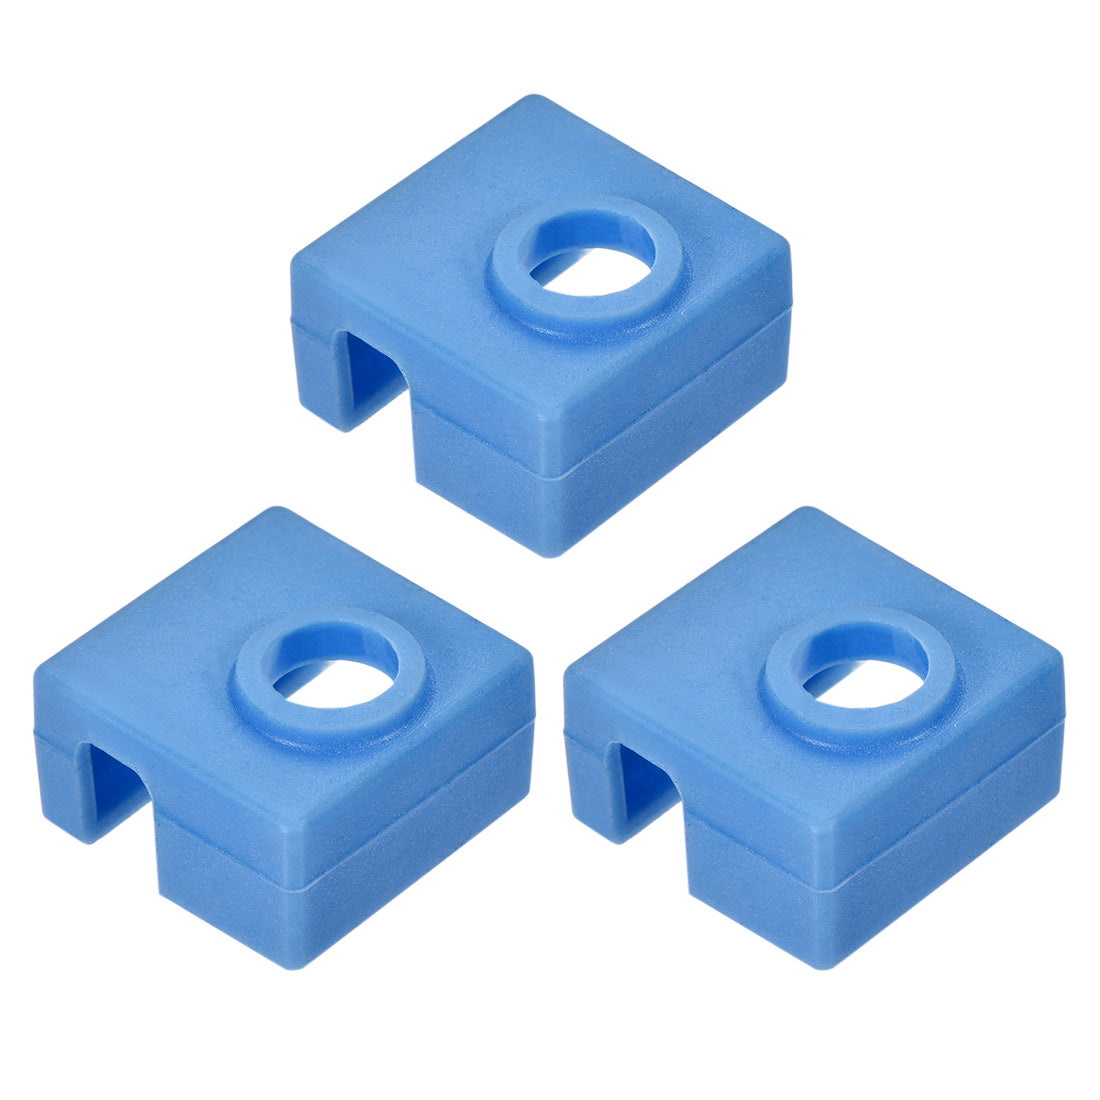 uxcell Uxcell 3D Printer Heater Block Silicone Cover MK7/MK8/MK9 Blue 3pcs